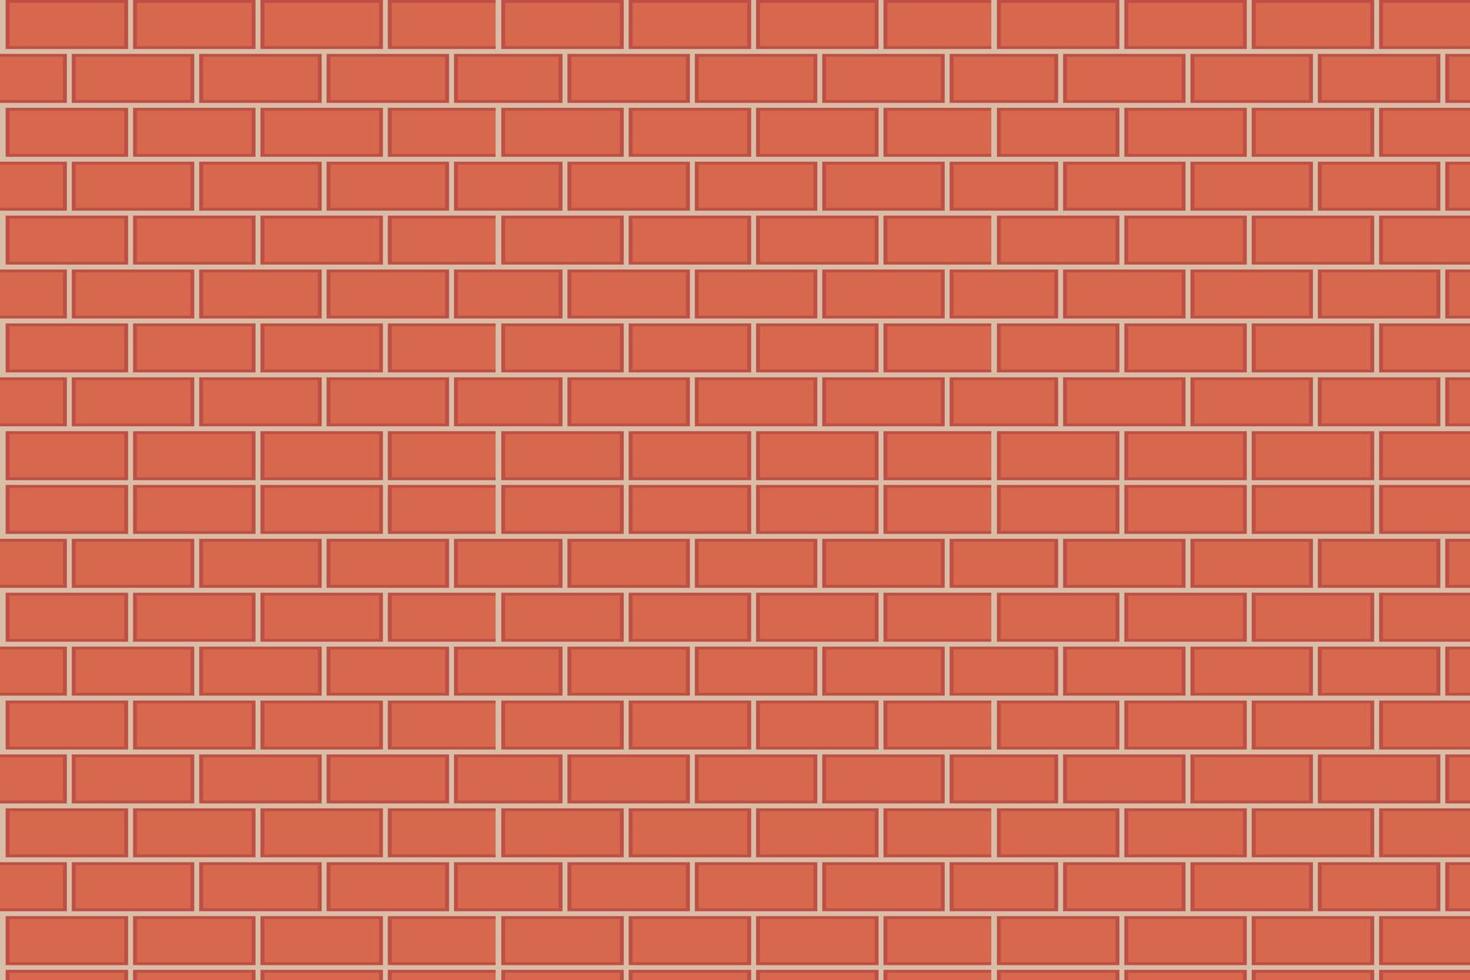 Brick wall, seamless pattern. Terracotta color. Construction. For website design, photo phones, packaging, wrapping paper, textiles, wallpaper. Vector illustration